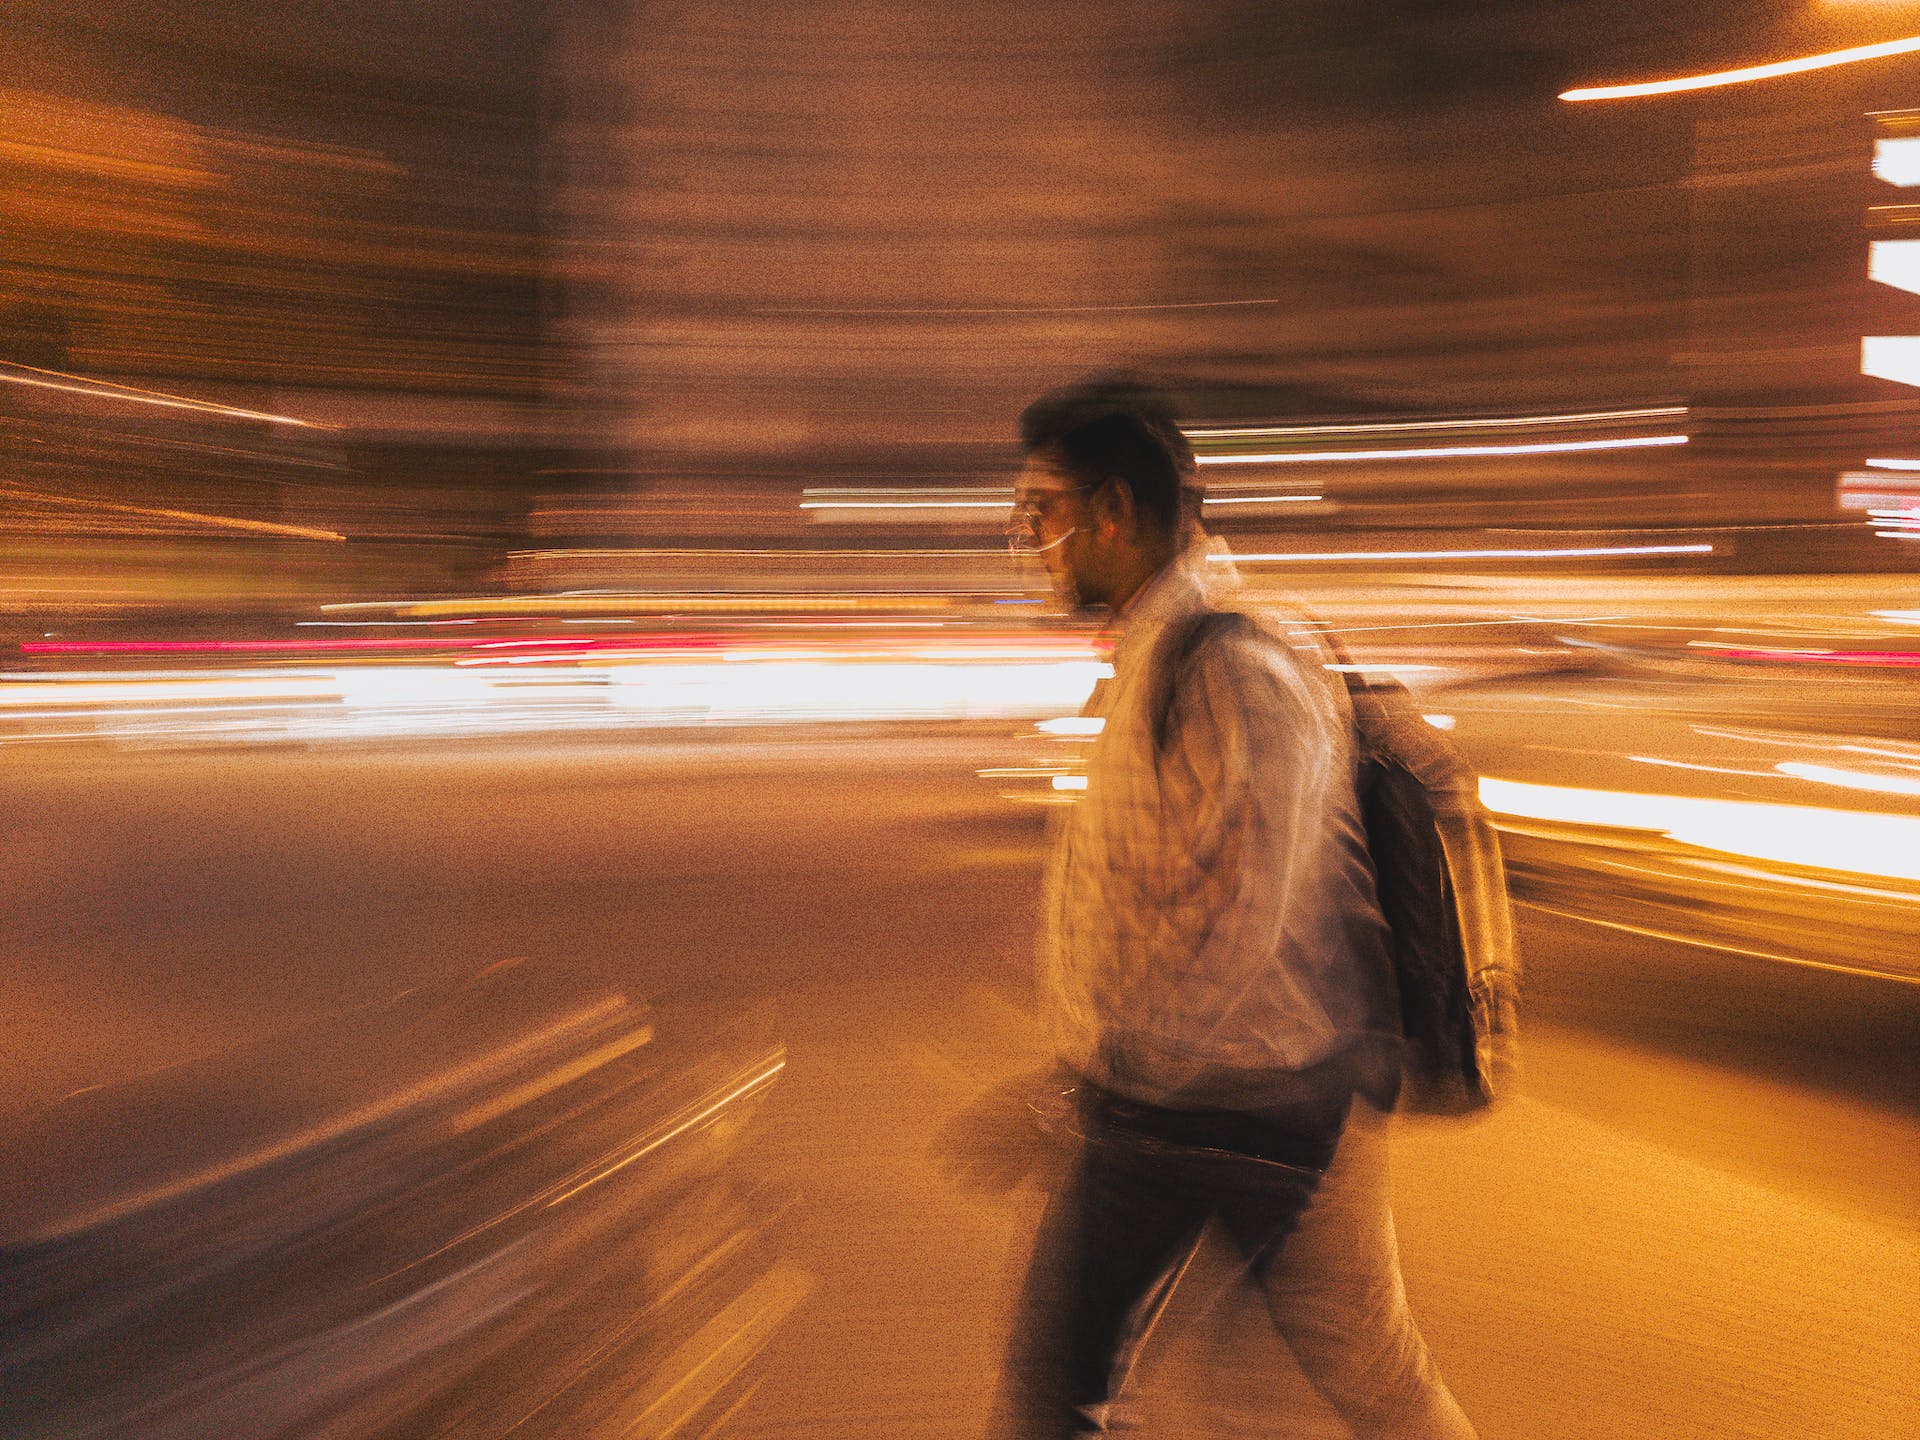 A blurred photo of a person walking | Source: Pexels